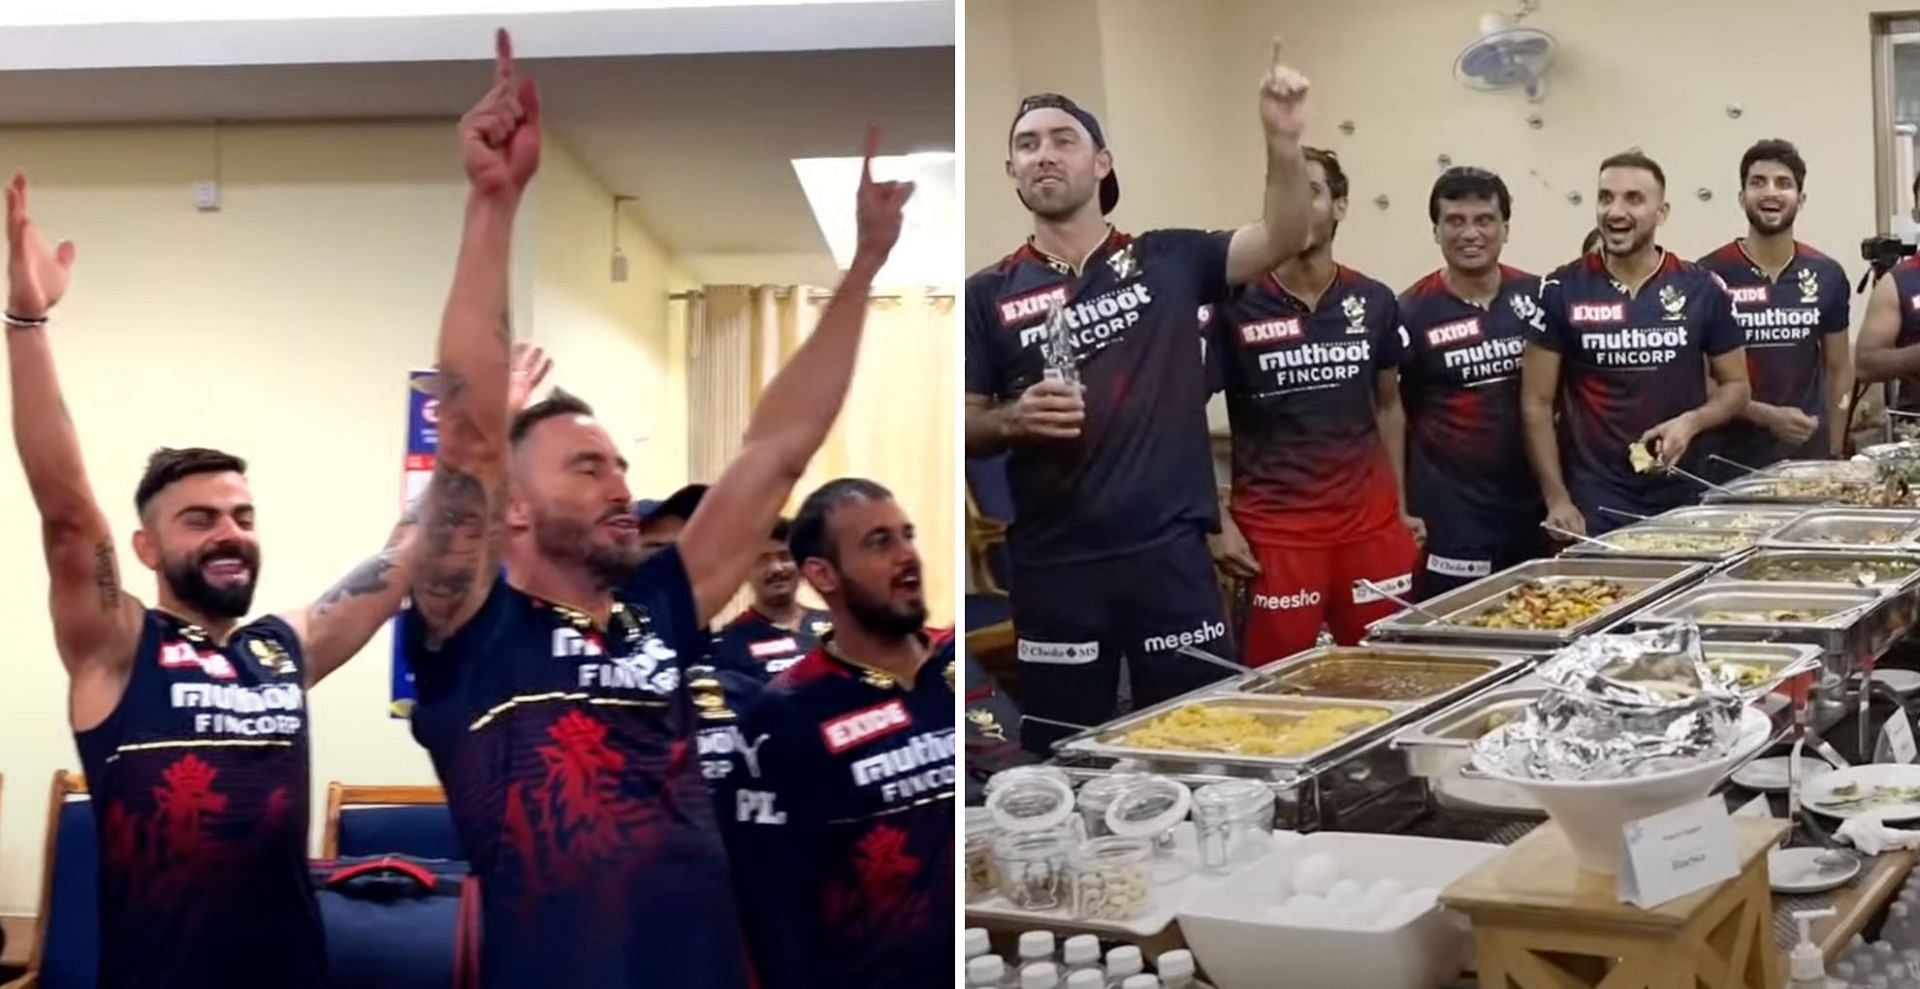 Royal Challengers Bangalore cricketers have fun after their win against RCB (Credit: Twitter/RCB)